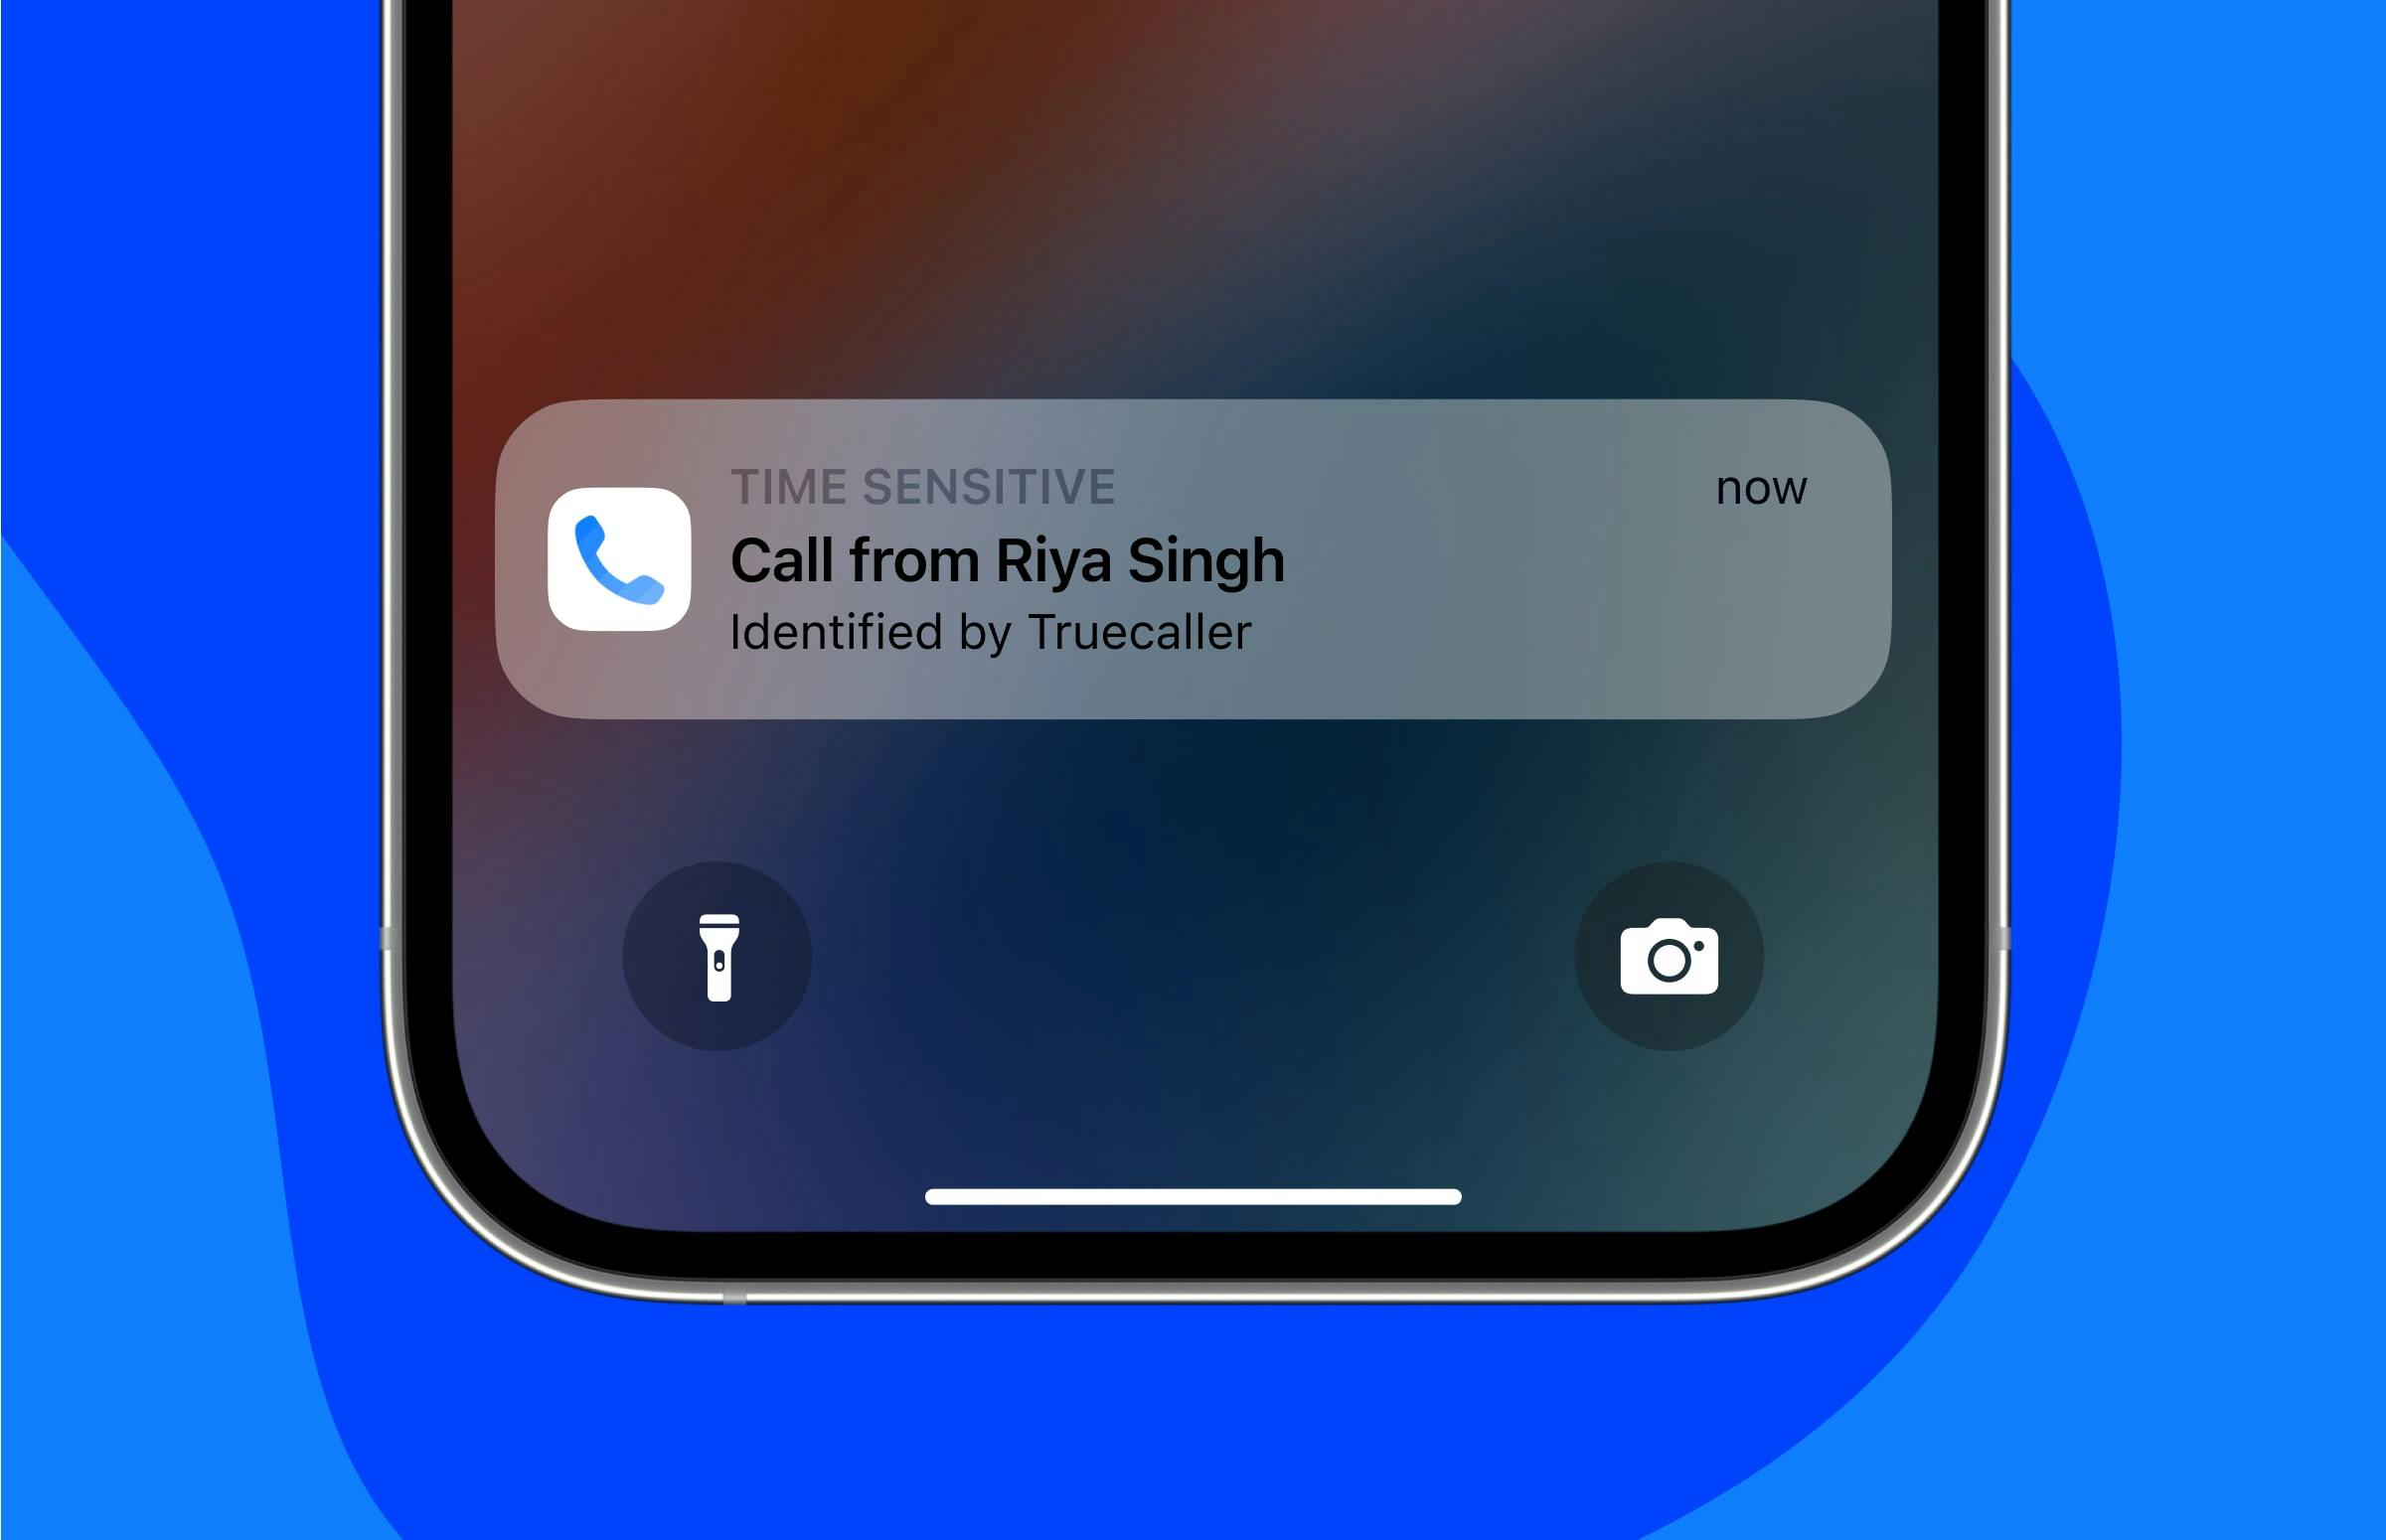 How a Call Alert appears on your phone screen